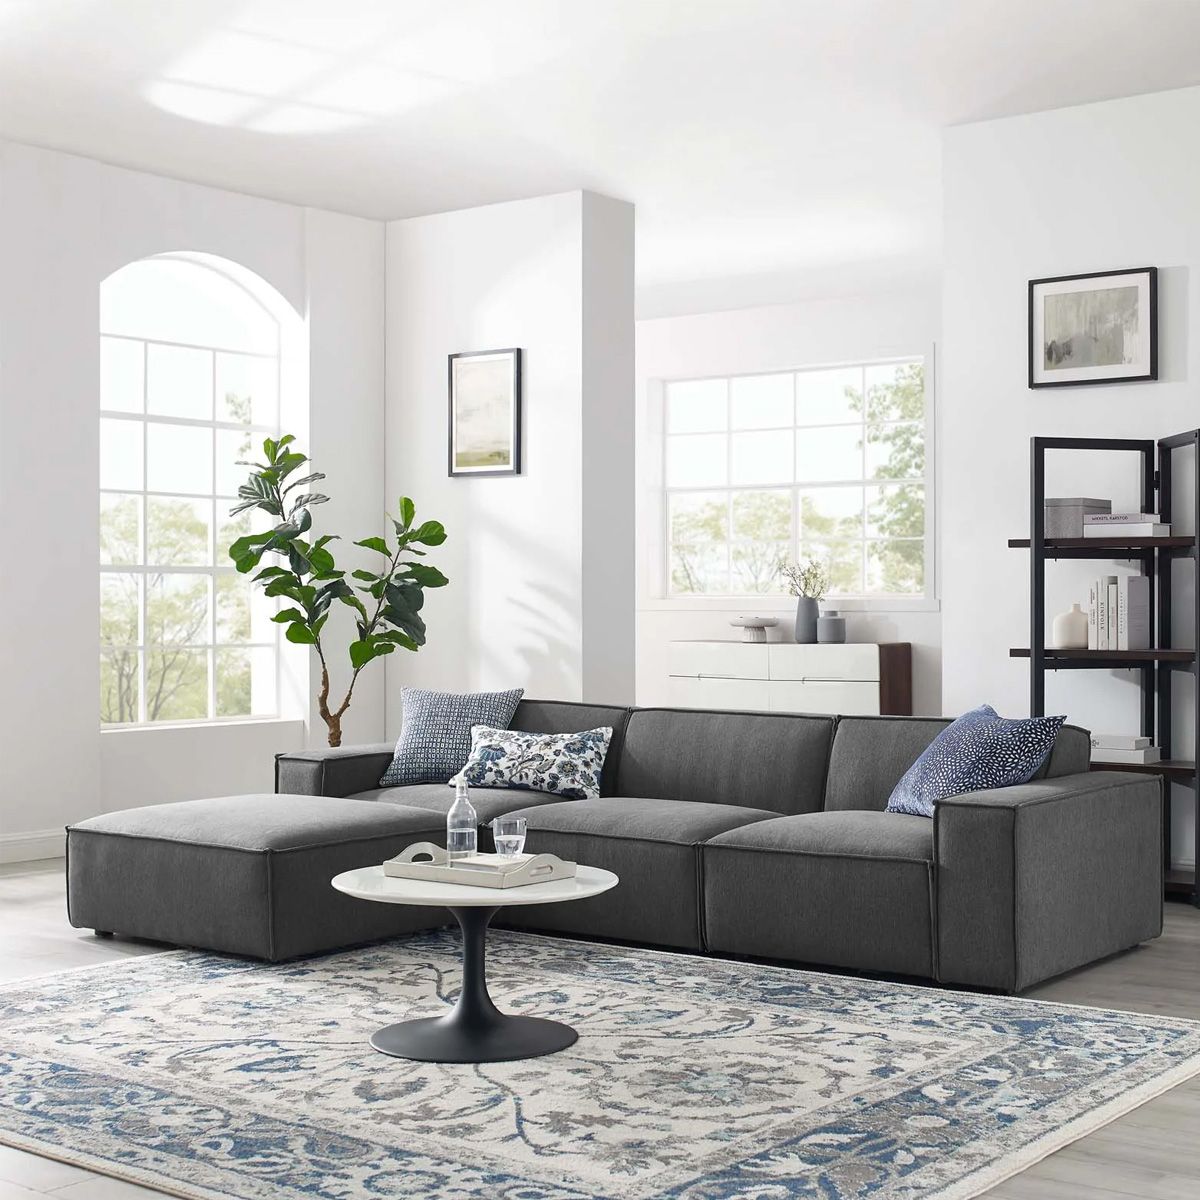 Vitality Sectional Sofa 4 Pieces In Dark Grey From Aed 1949 | Atoz Furniture Within Dark Gray Sectional Sofas (View 6 of 15)